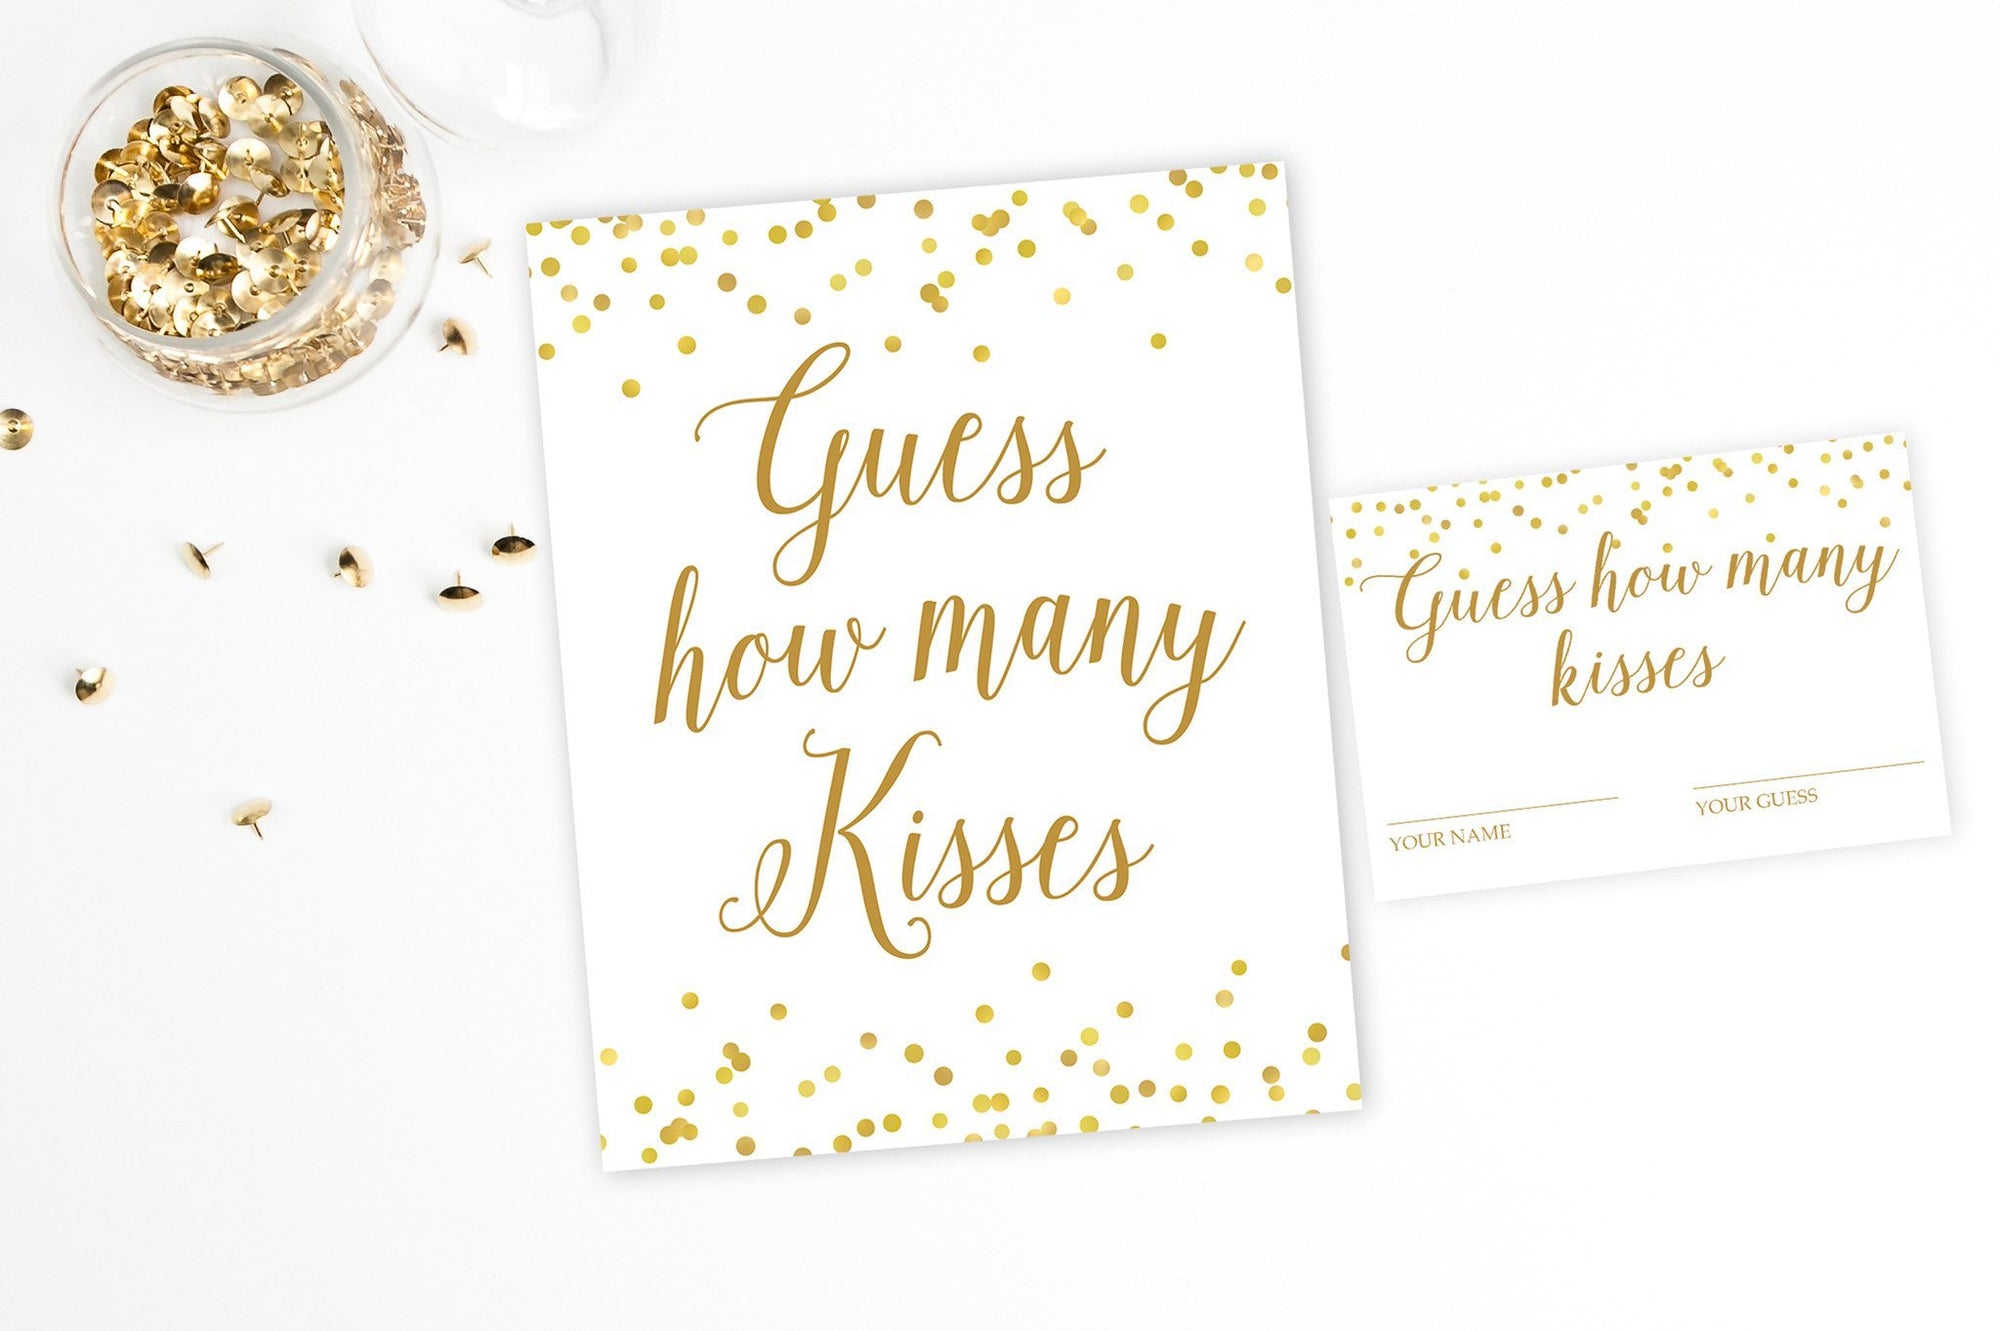 Guess How Many Kisses - Gold Confetti Printable - Pretty Collected